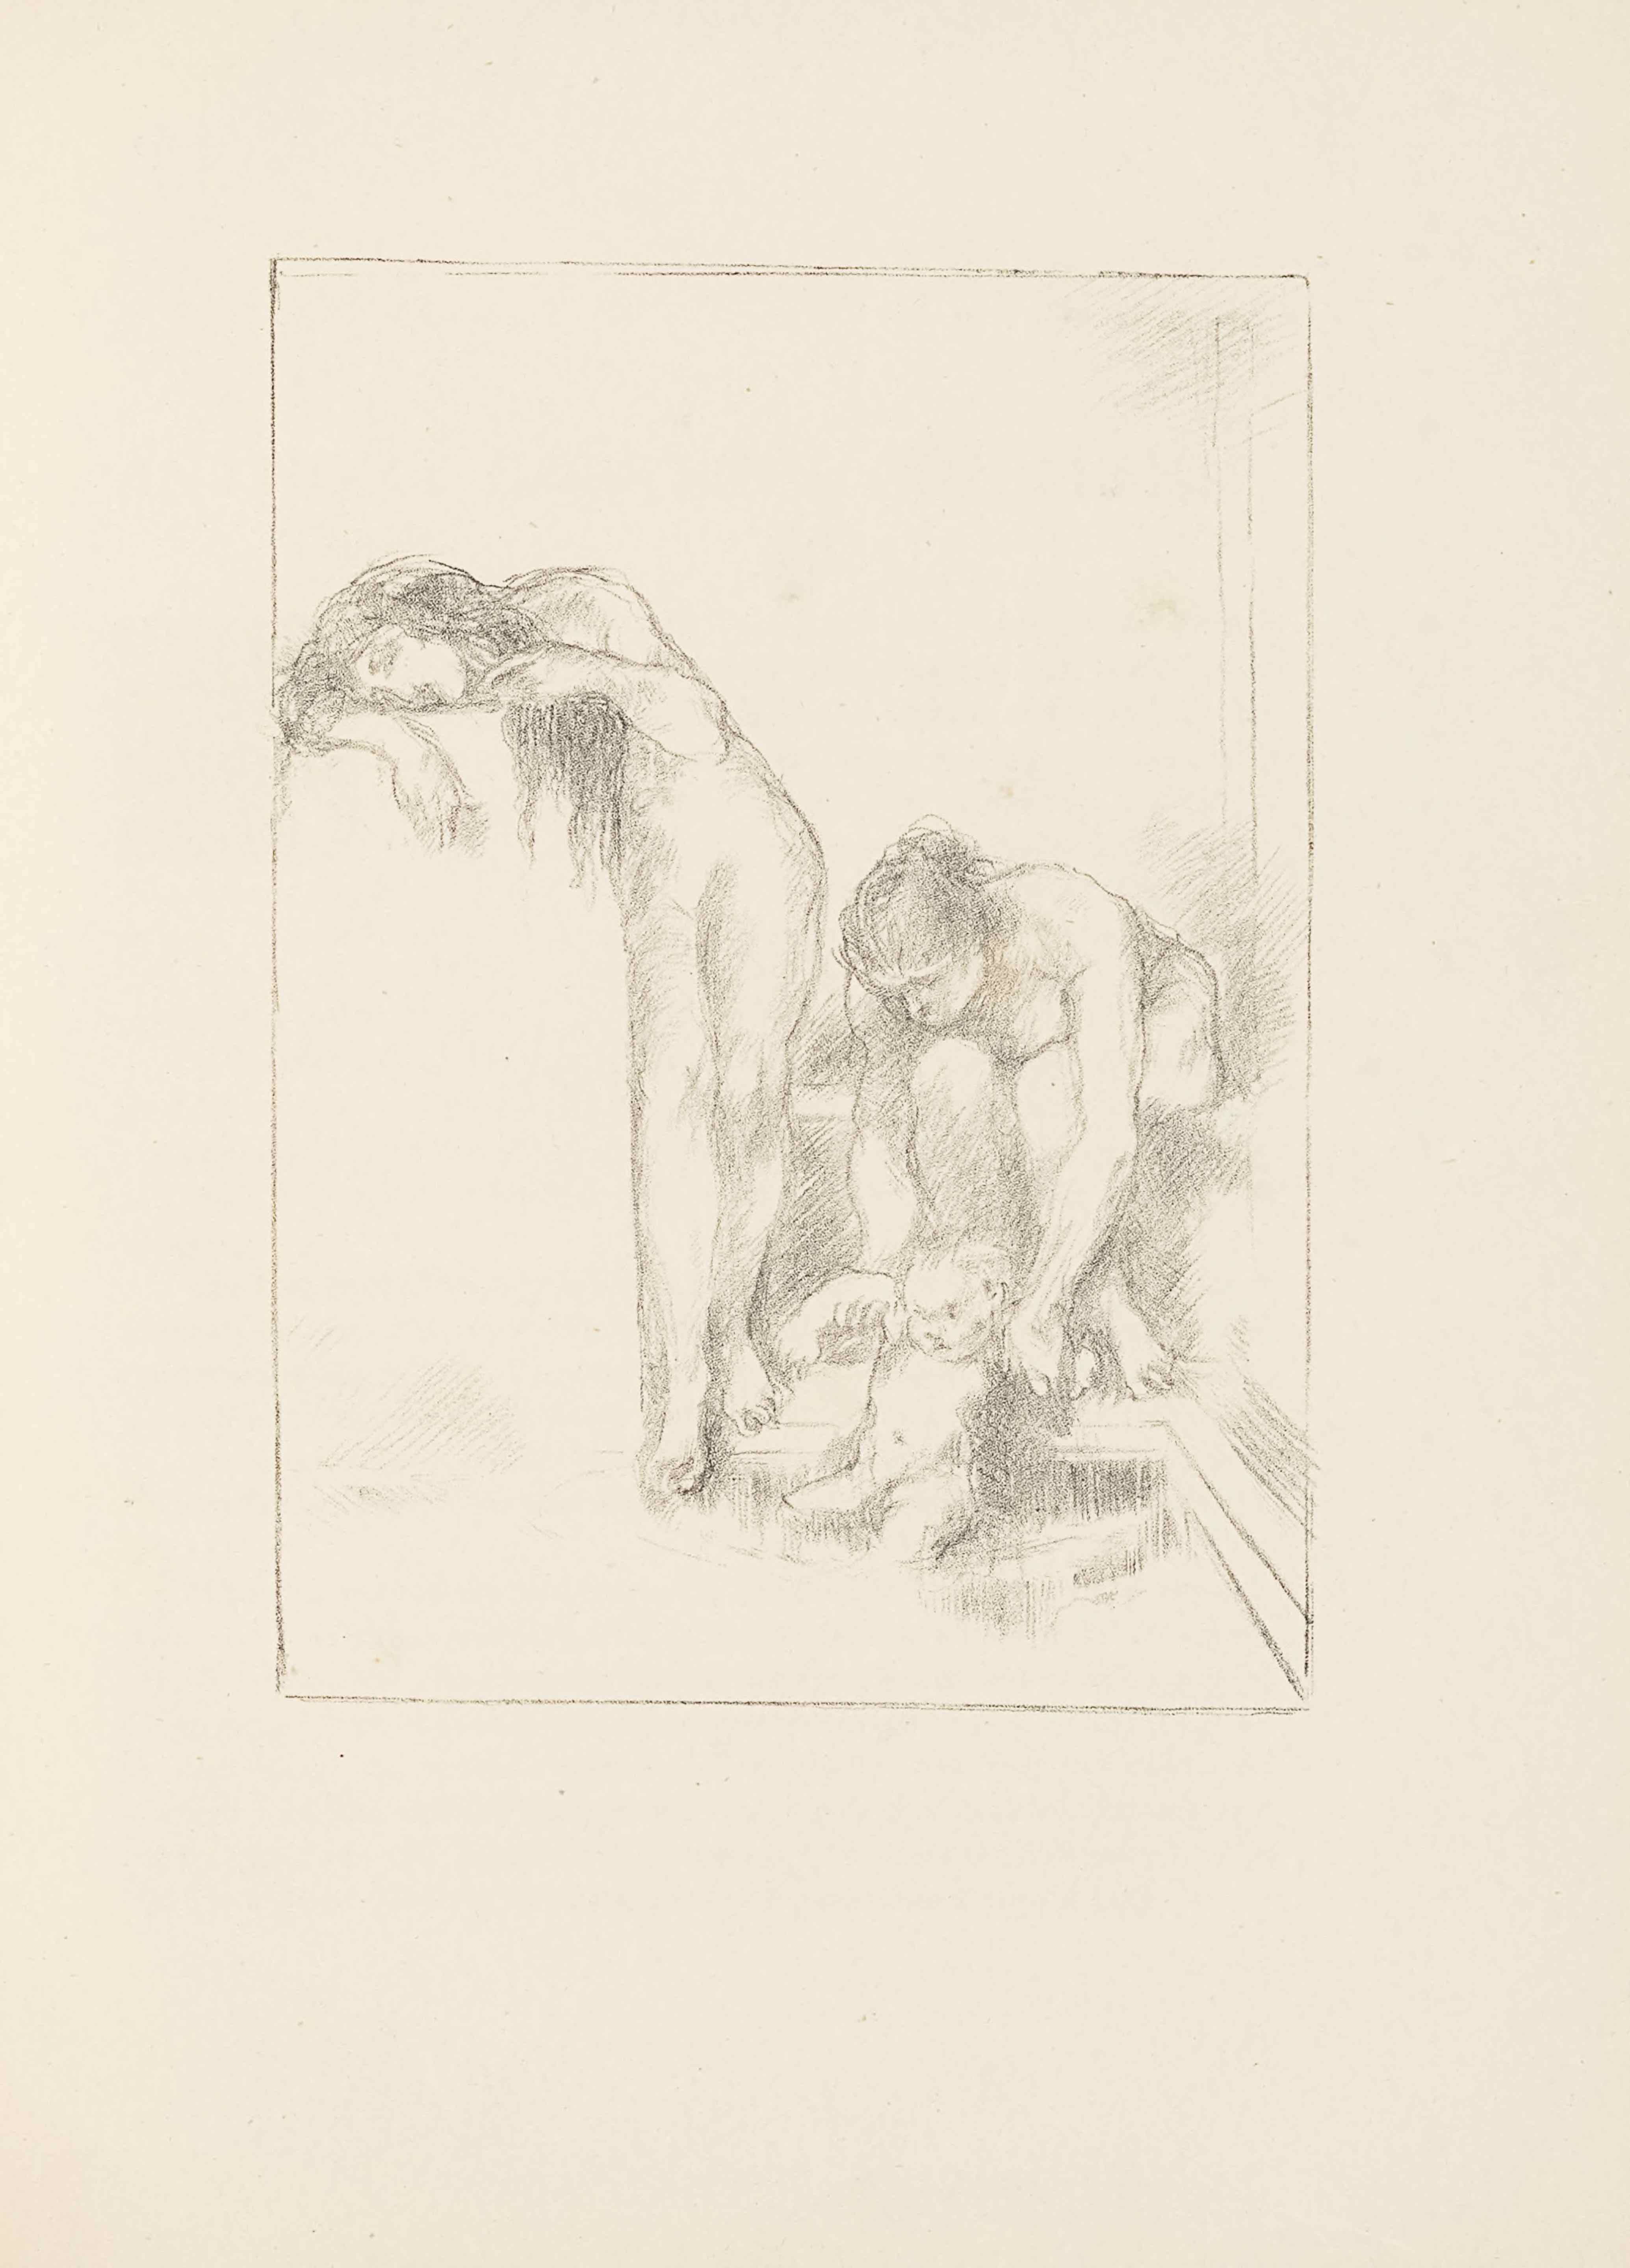 This lithograph appears in portrait orientation, within a light frame. The image shows three naked figures bathing: two women and a baby. The woman on the left is standing beside a large pillar or block and resting her head on its top. Her body faces forward to the viewer, and her right arm is bent and resting on top of the block, with her head rested horizontally on top. Her left arm is also bent, holding strands of her long hair back. She has long and wavy dark hair. Her face is inexpressive, showing only open eyes and a closed mouth. To her right is a woman sitting on a plain box or step that is shaded slightly darker than the surrounding area. She has long hair pulled back into a knot and is leaning forward with arms extended down and out to hold up the baby in the pool below. The baby sits on the edge of the pool with its body facing forwards to the viewer slightly turned to the left, with legs spread and arms extended out to the side. The arms are held out by the seated woman above. The baby has light short hair.